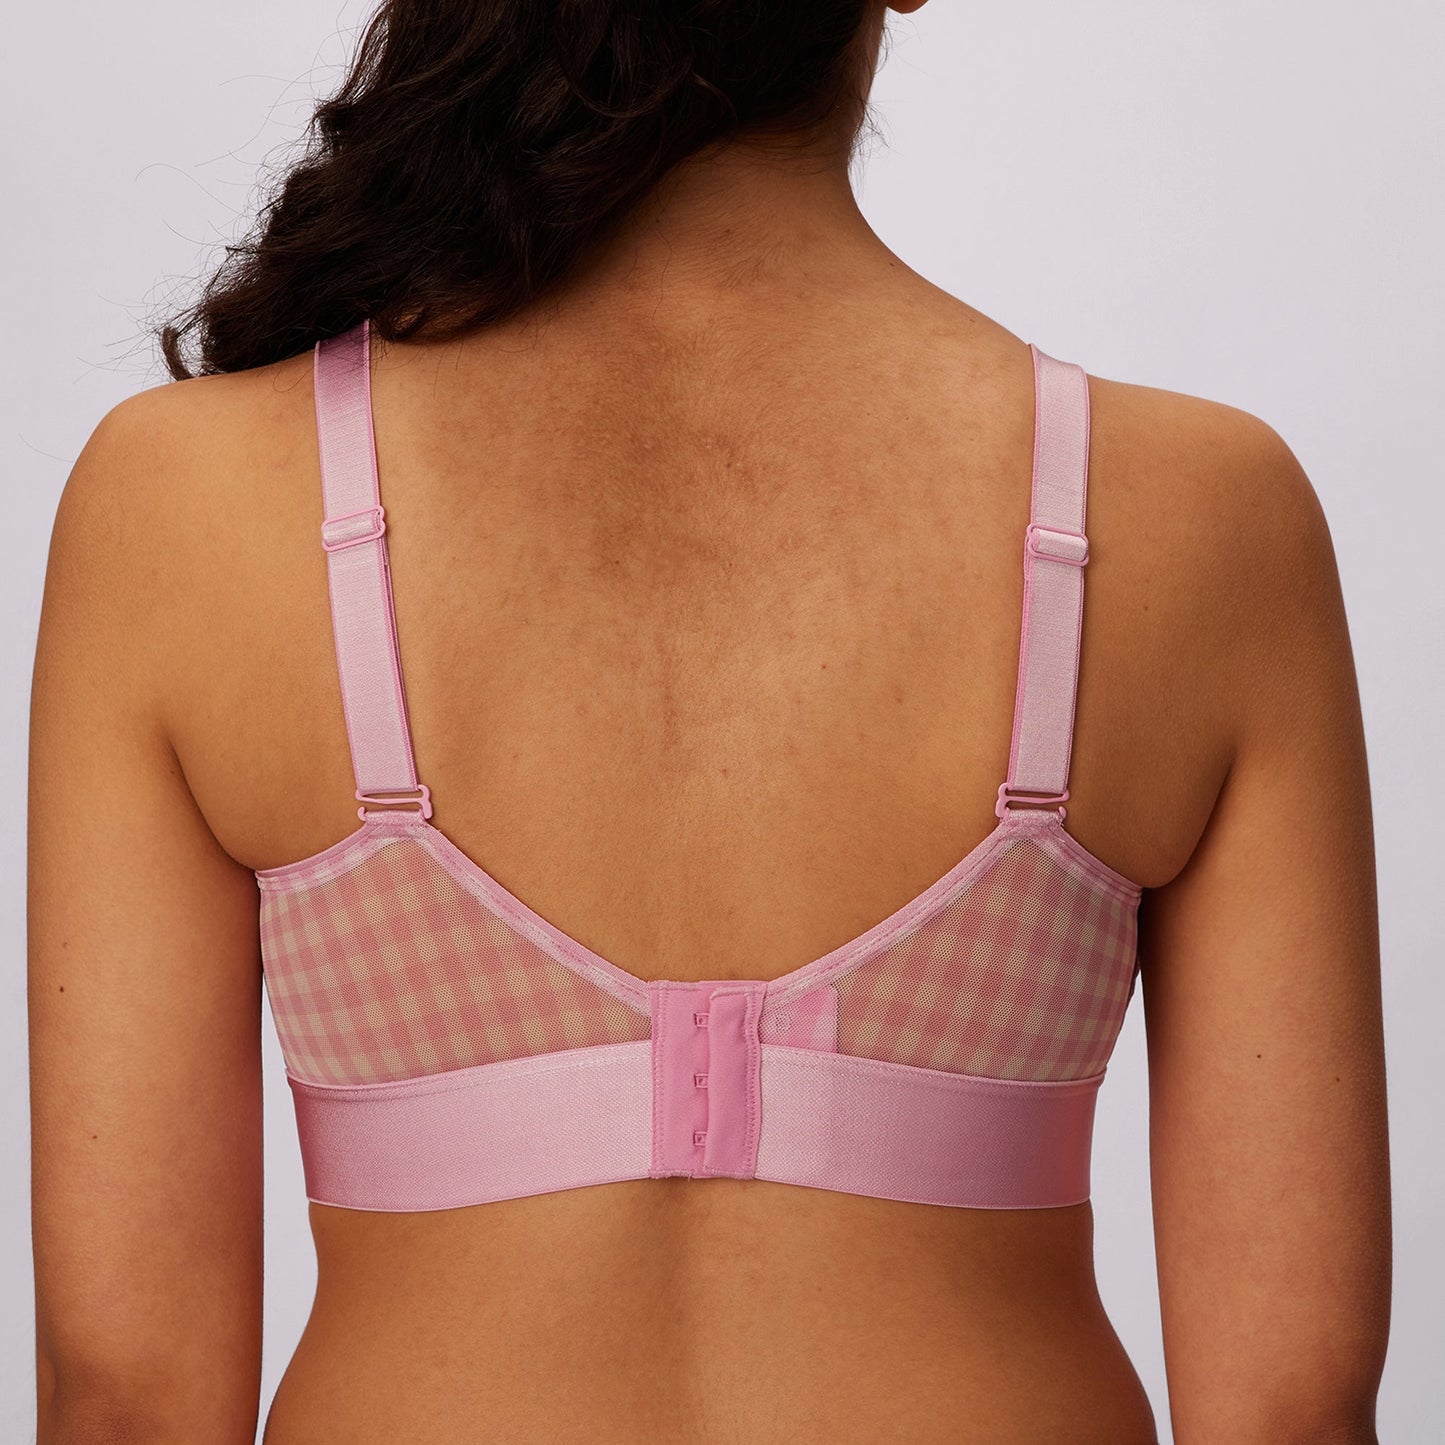 Luxe Mesh Scoop Bralette | Silky Mesh | Archive (Bubble Gum Gingham)